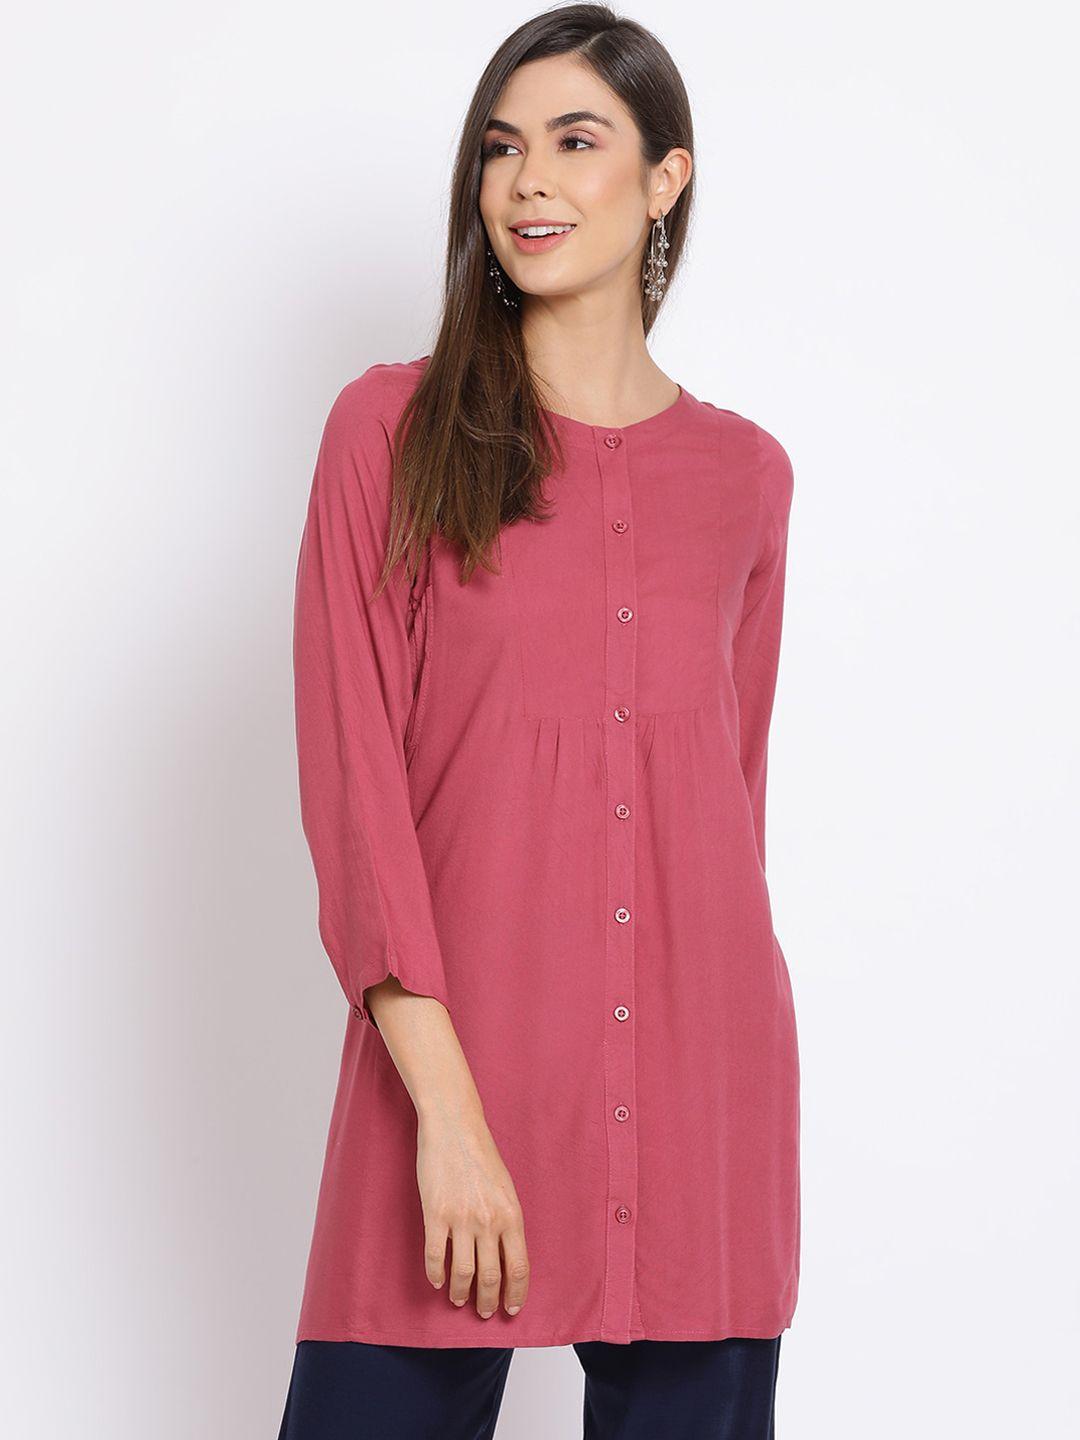 oxolloxo women pink solid tunic